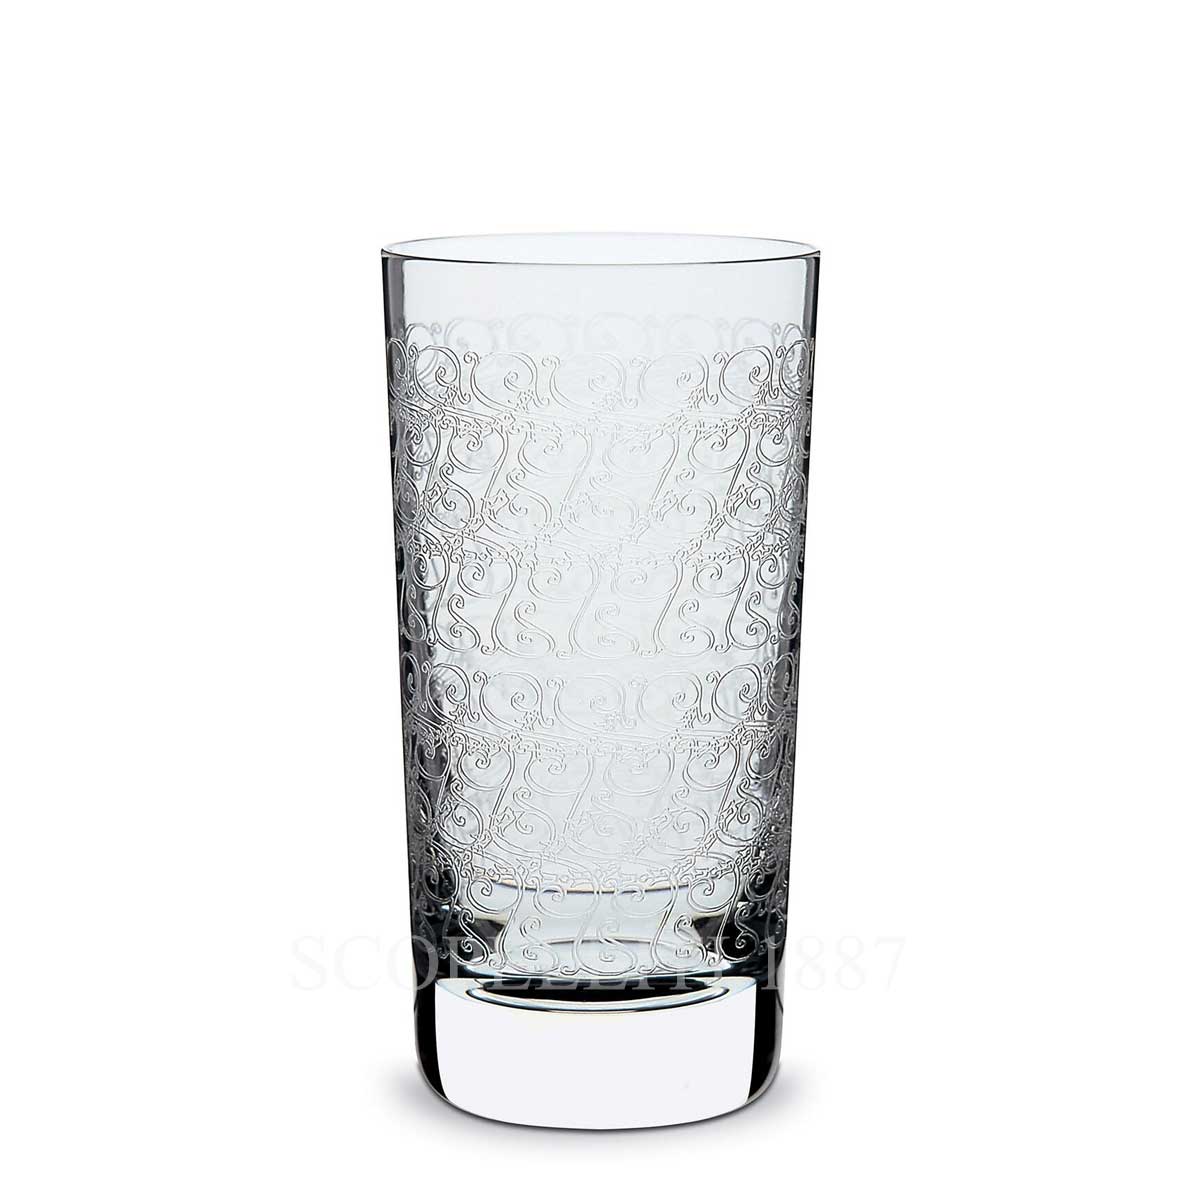 Baccarat Mille Nuits Short Crystal Water Glass - SCOPELLITI 1887